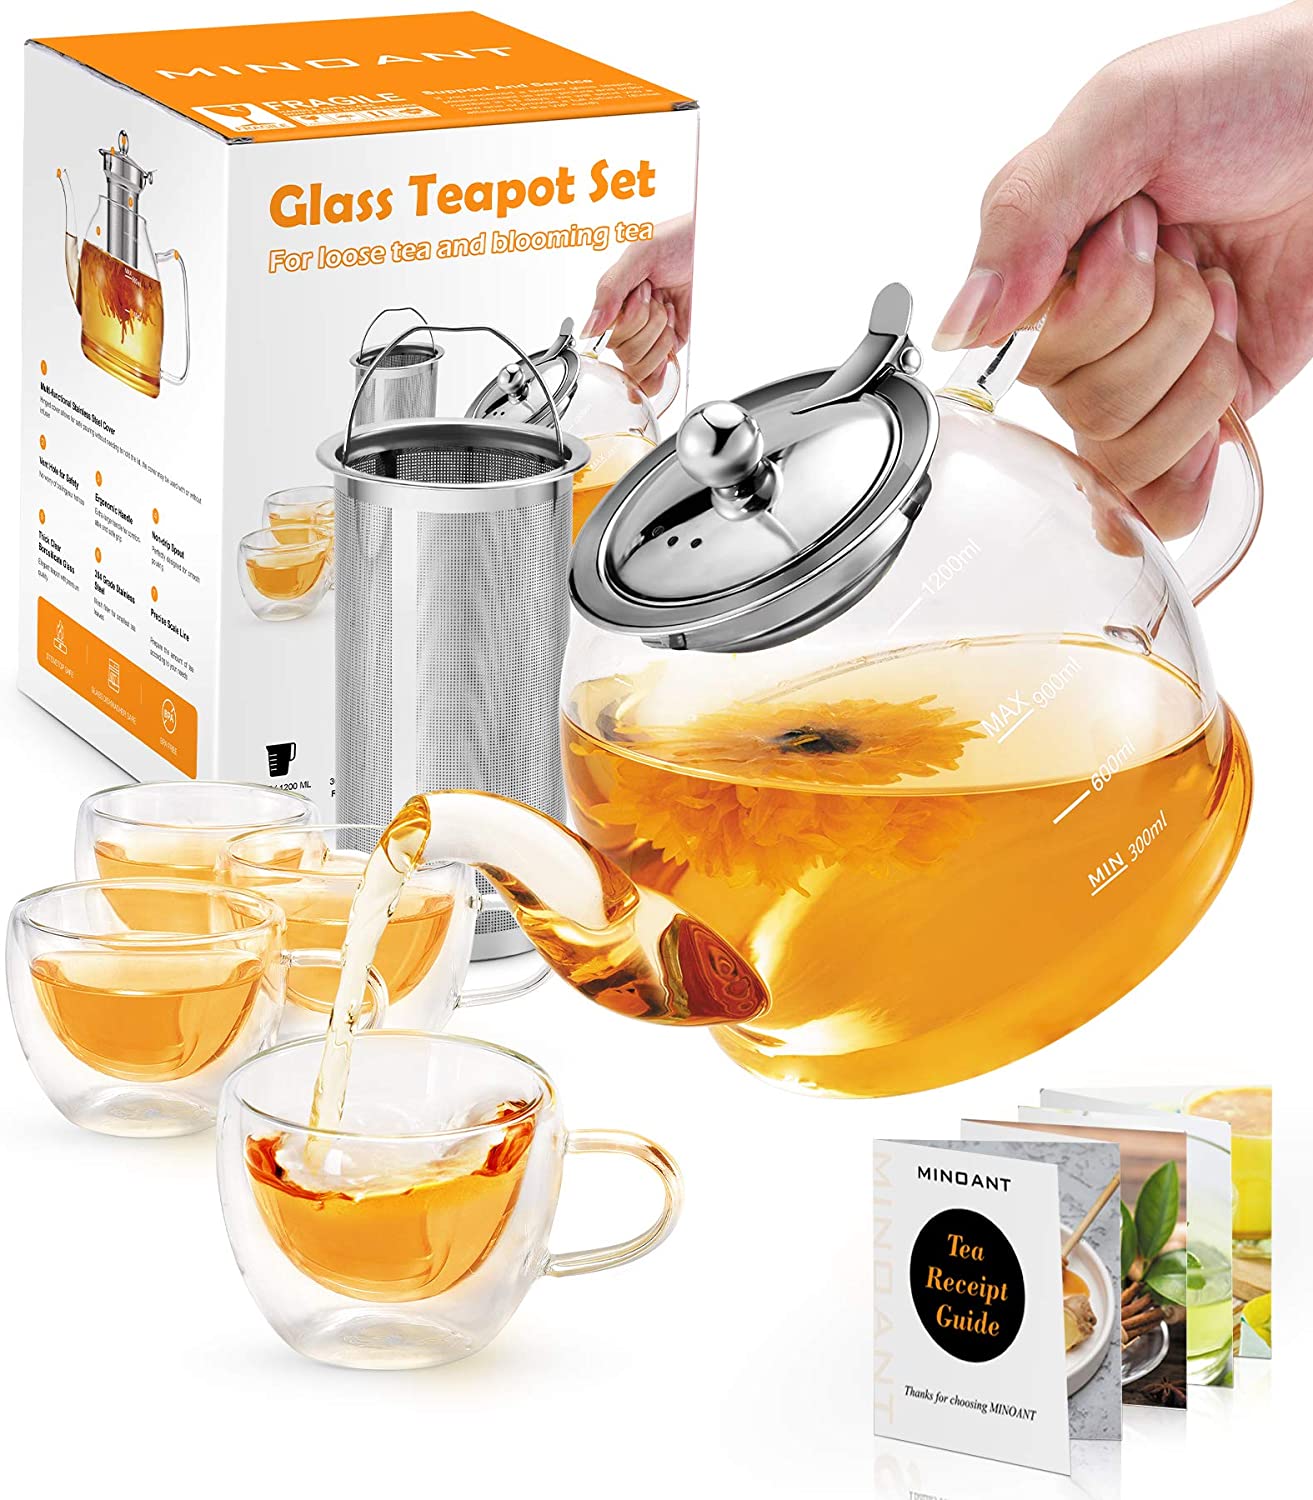 MINO ANT 1200 ml Teapot Glass Set, Teapot with Strainer Insert, Tea Service 4 Double-Walled Glasses, Borosilicate Glass Teapot, Glass Teapot with Strainer Insert, Tea Infuser for Loose Leaves Teapot Set